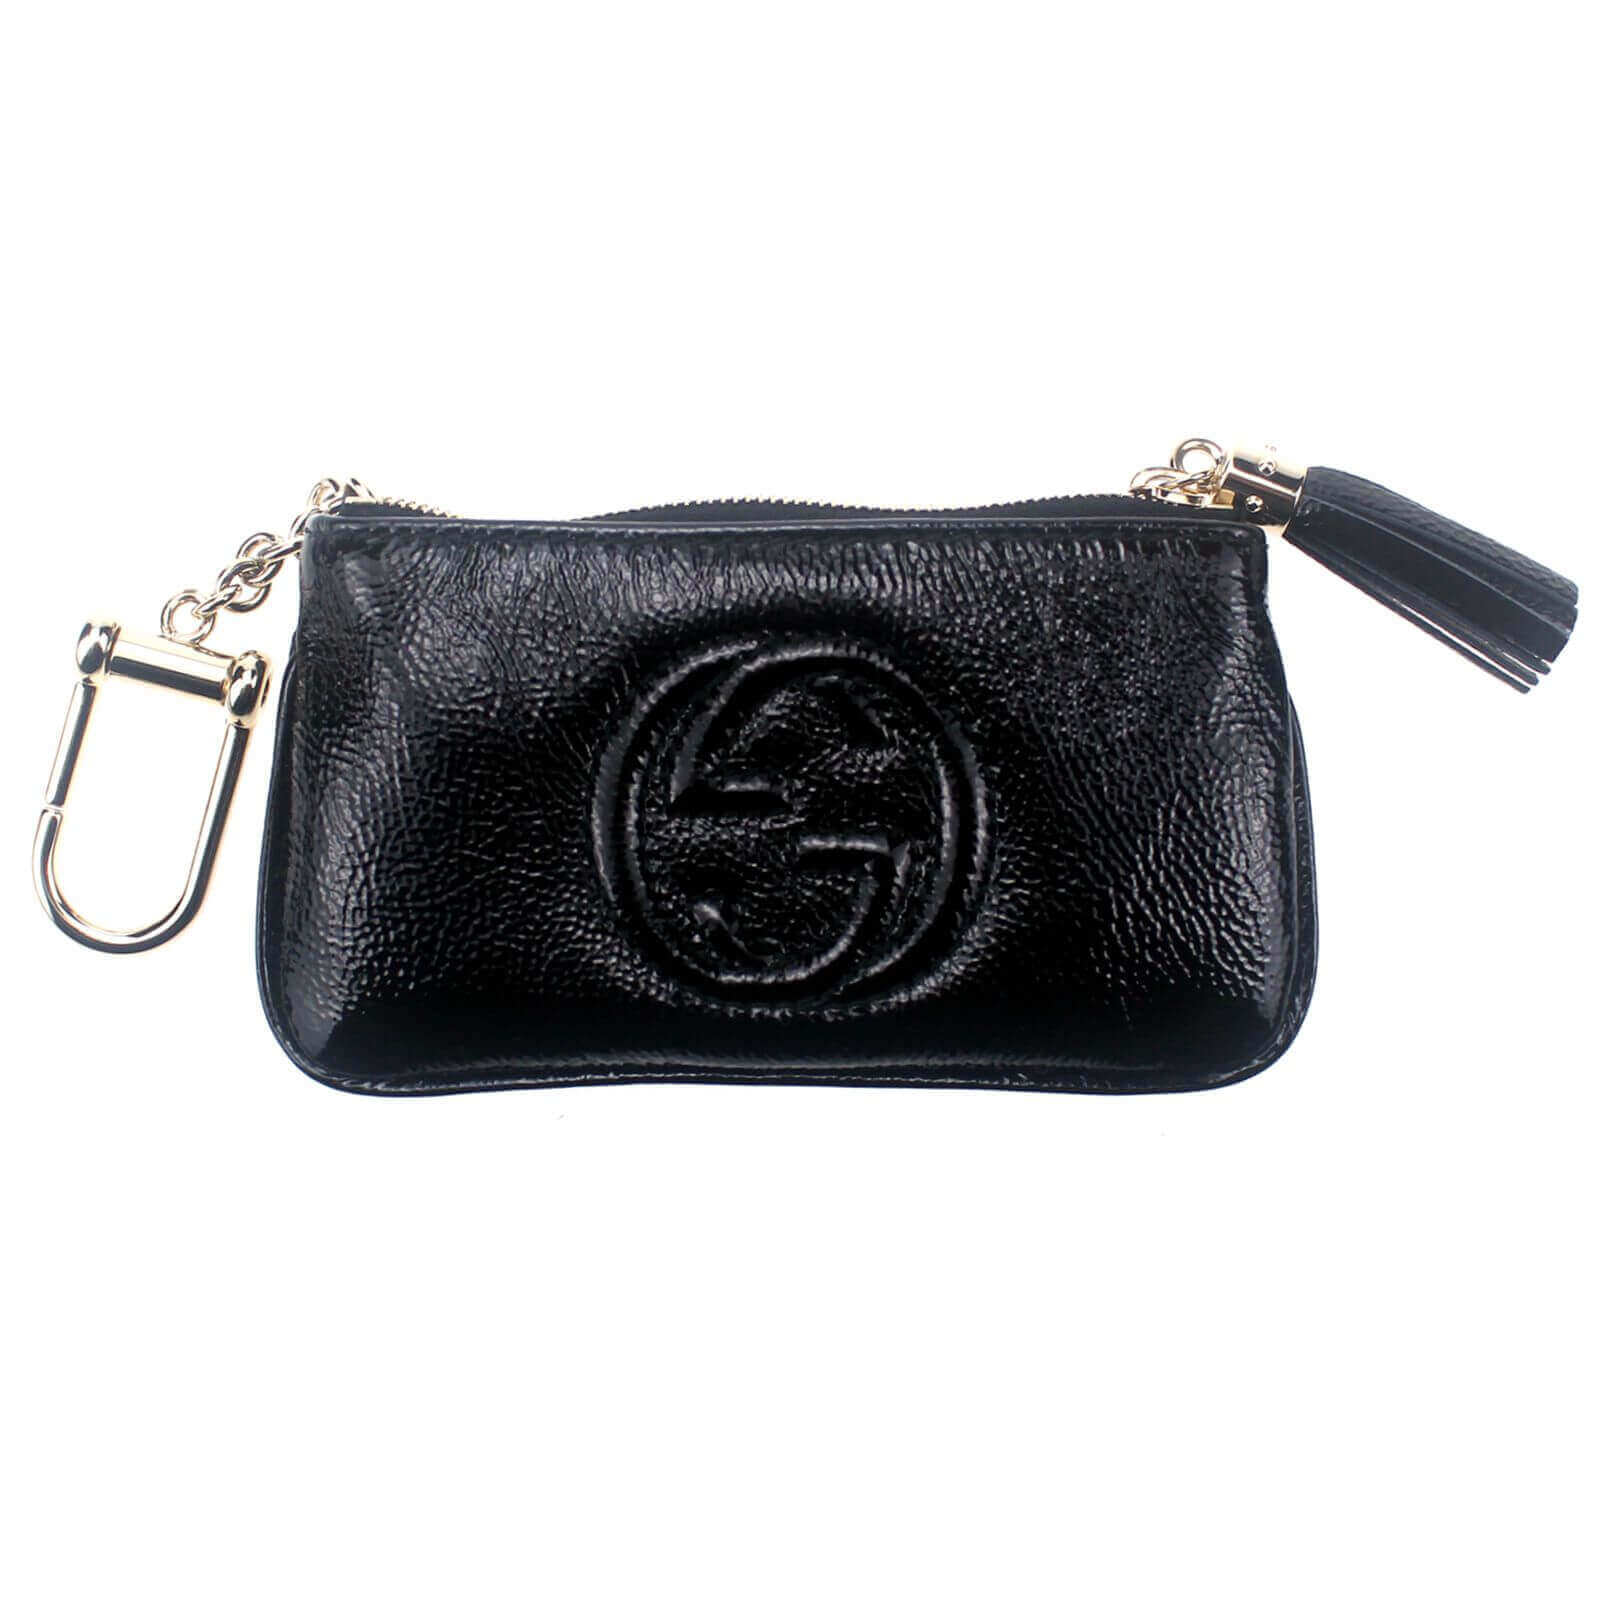 gucci coin pouch keychain